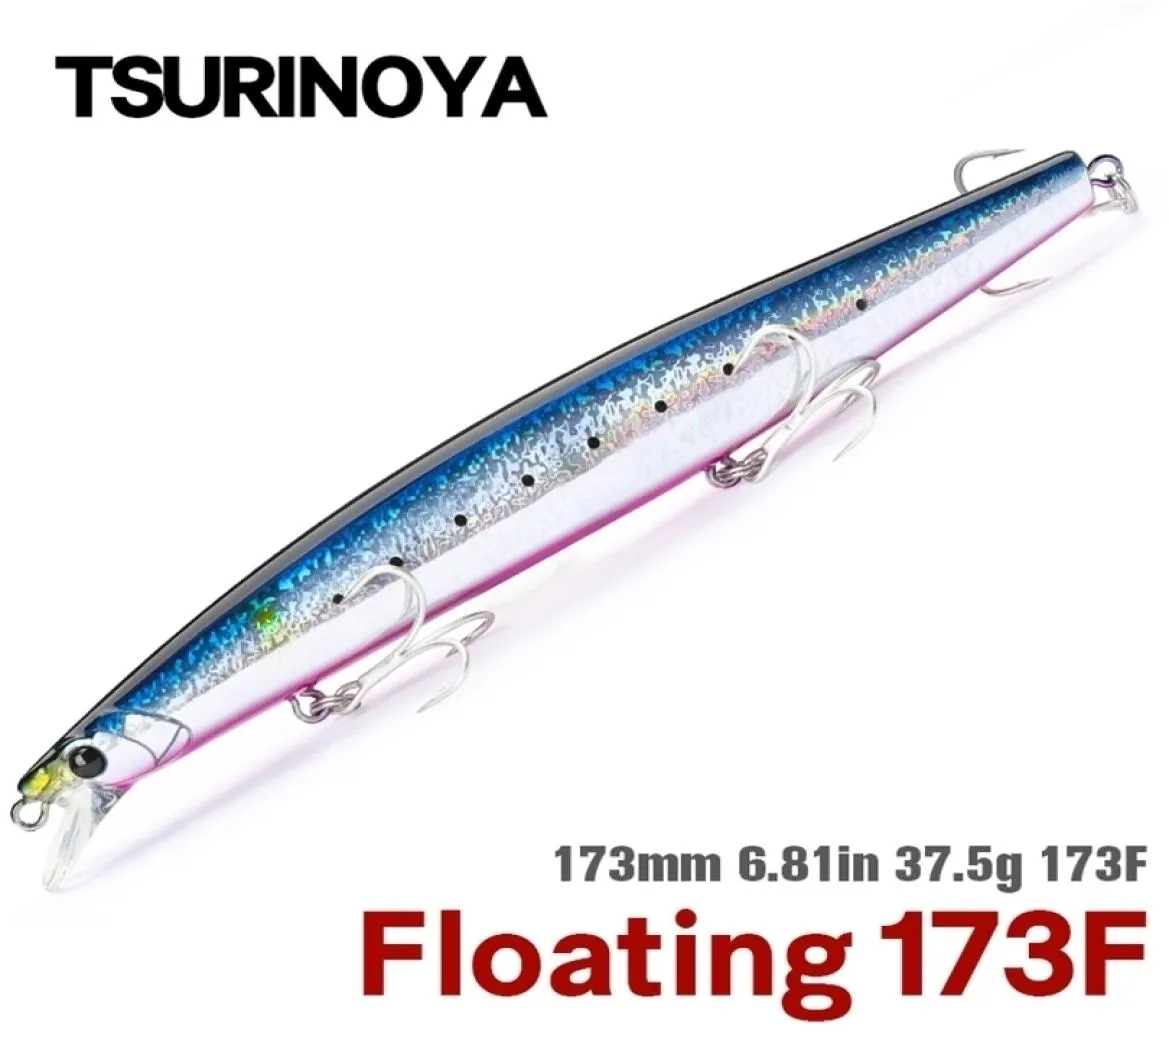 Baits Lures TSURINOYA 173F Ultralong Casting Floating Minnow 173mm 681in 375g Saltwater Fishing Lure STINGER Artificial Large Hard1722804